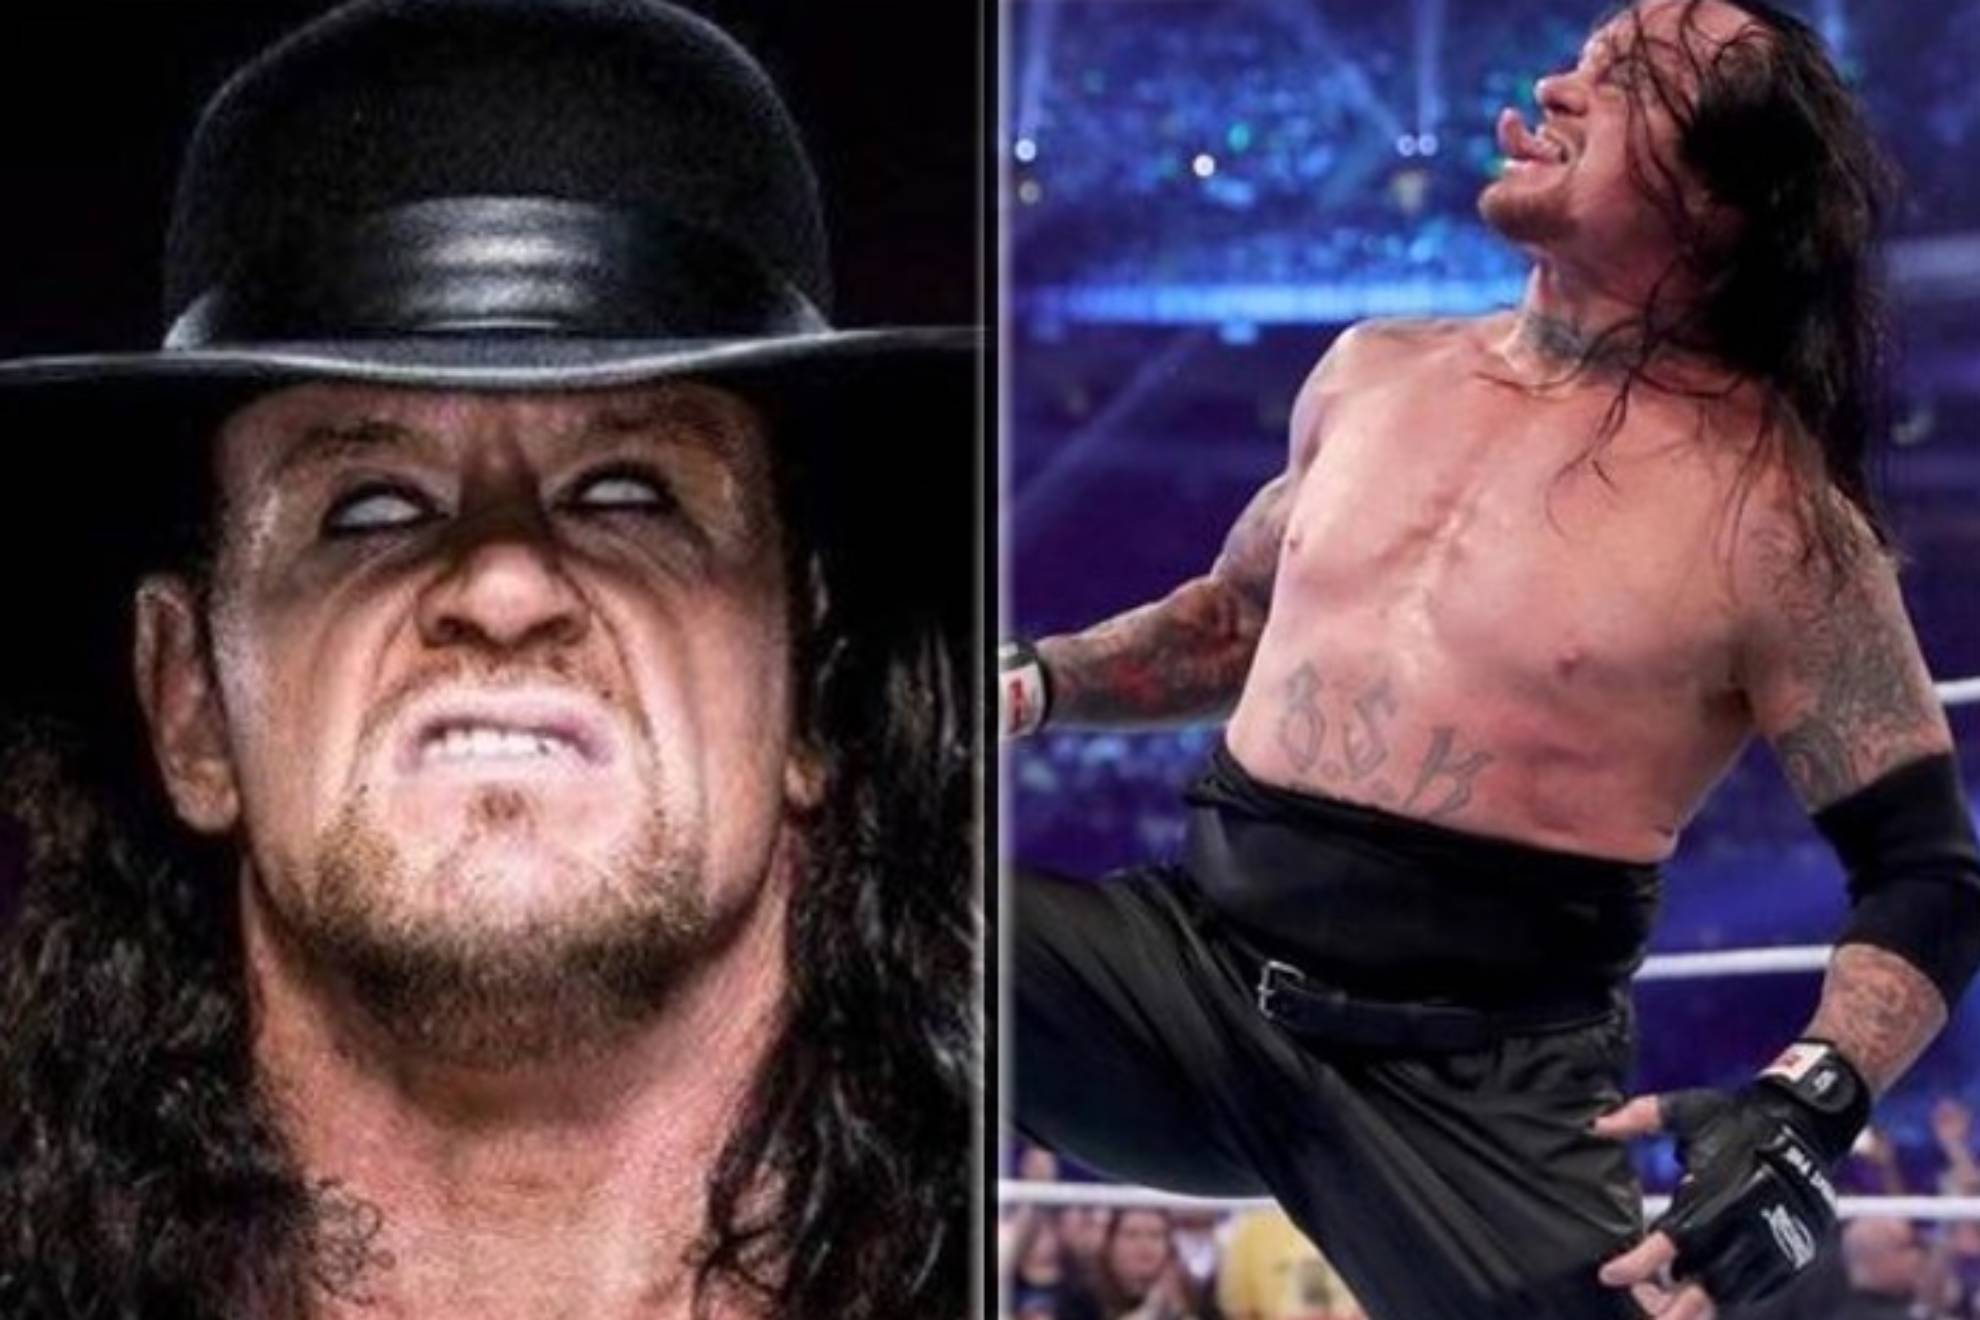 The Undertaker's strange case: from being buried alive to being afraid of cucumbers